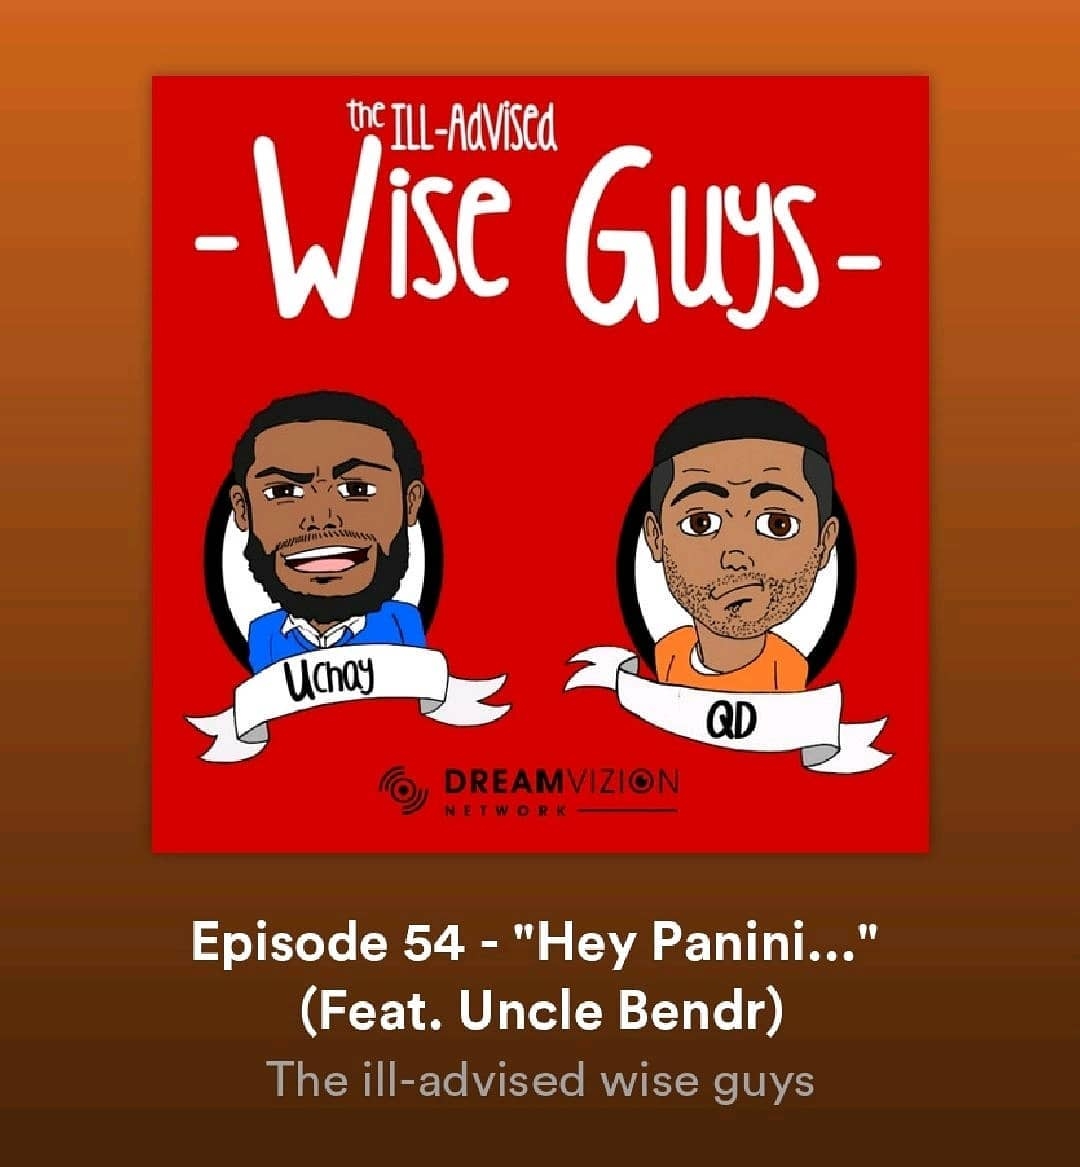 Episode 54 – “Hey Panini…” (Feat. Uncle Bendr)